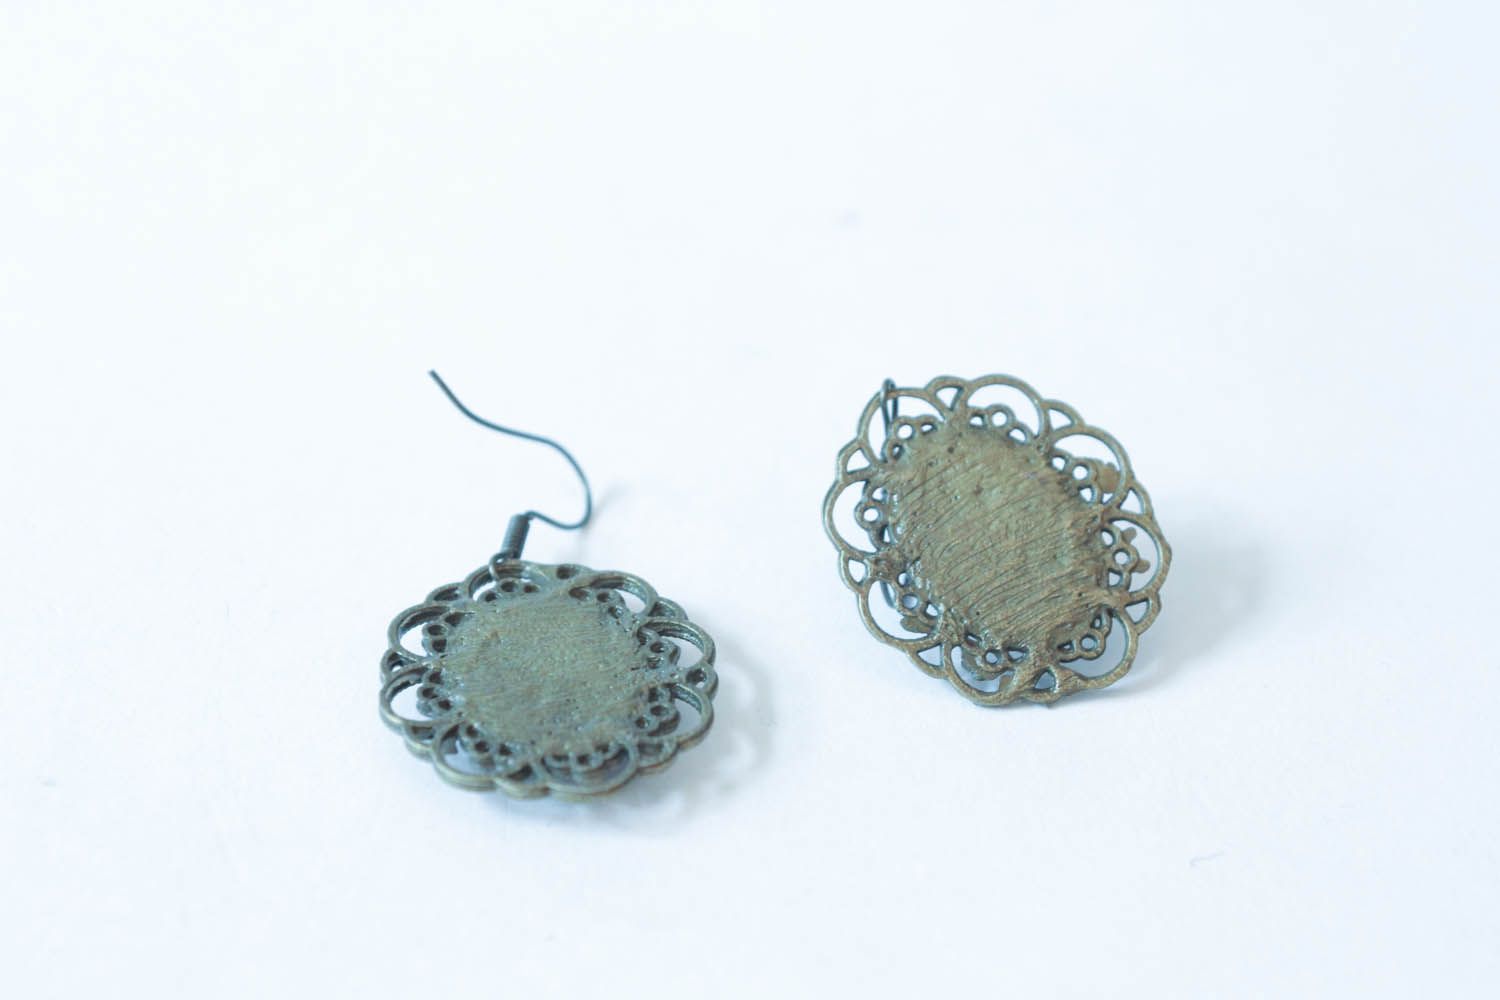 Vintage earrings with flowers photo 3